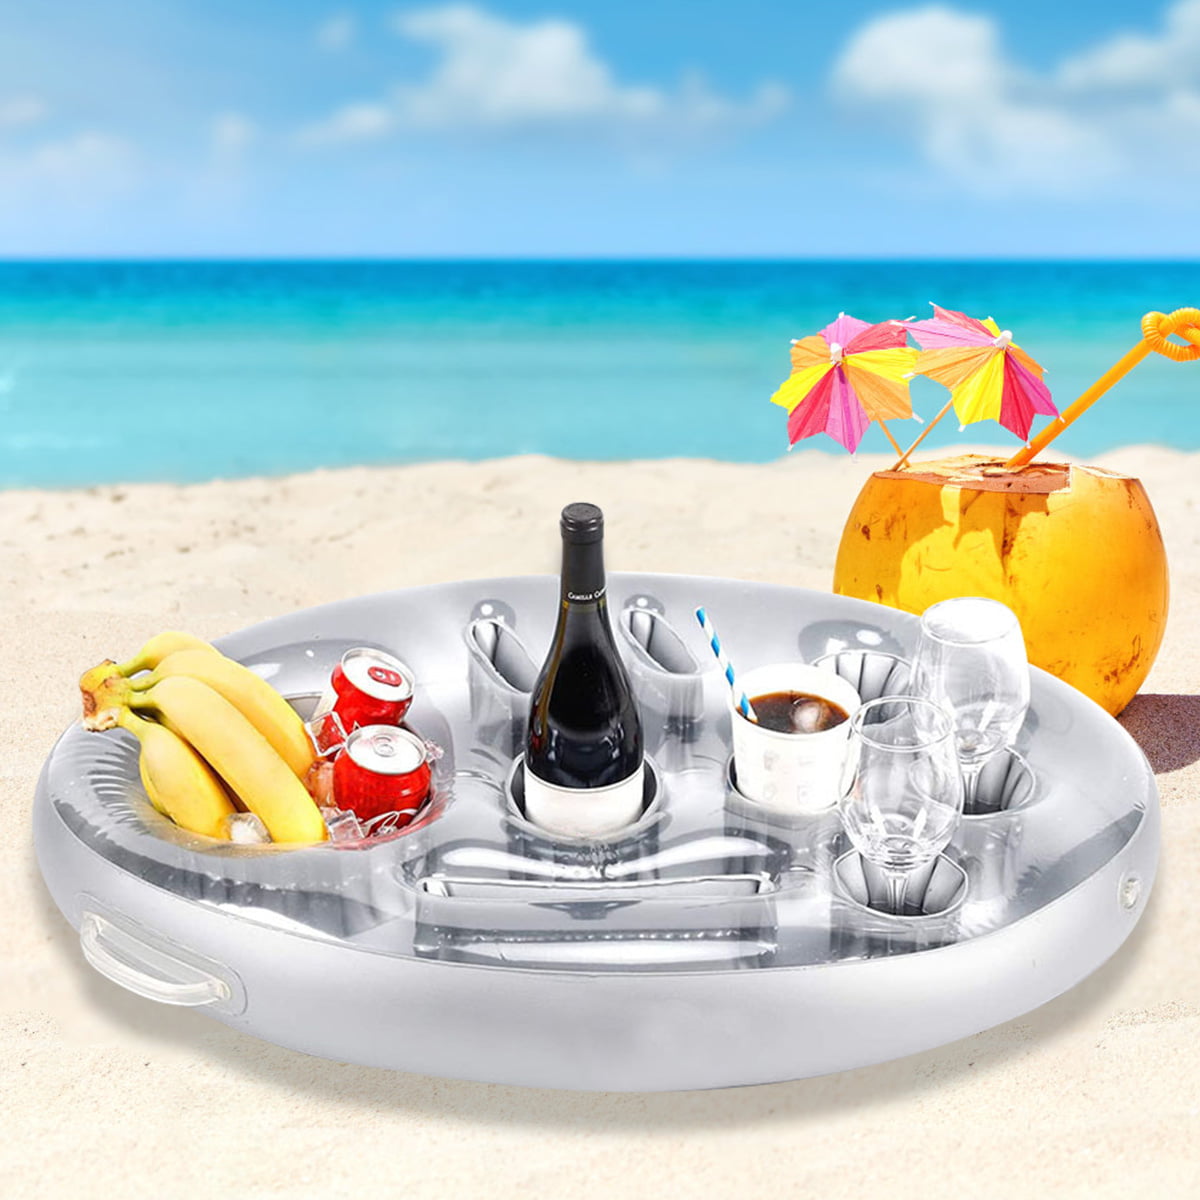 Inflatable Floating Drink Holder Floating Cup Holder 27.5 x 19.6 inch Large  Capacity Refreshment Table Tray with Handle for Pools Hot Tub Beach Party  Outdoor Pool Party Supplies 